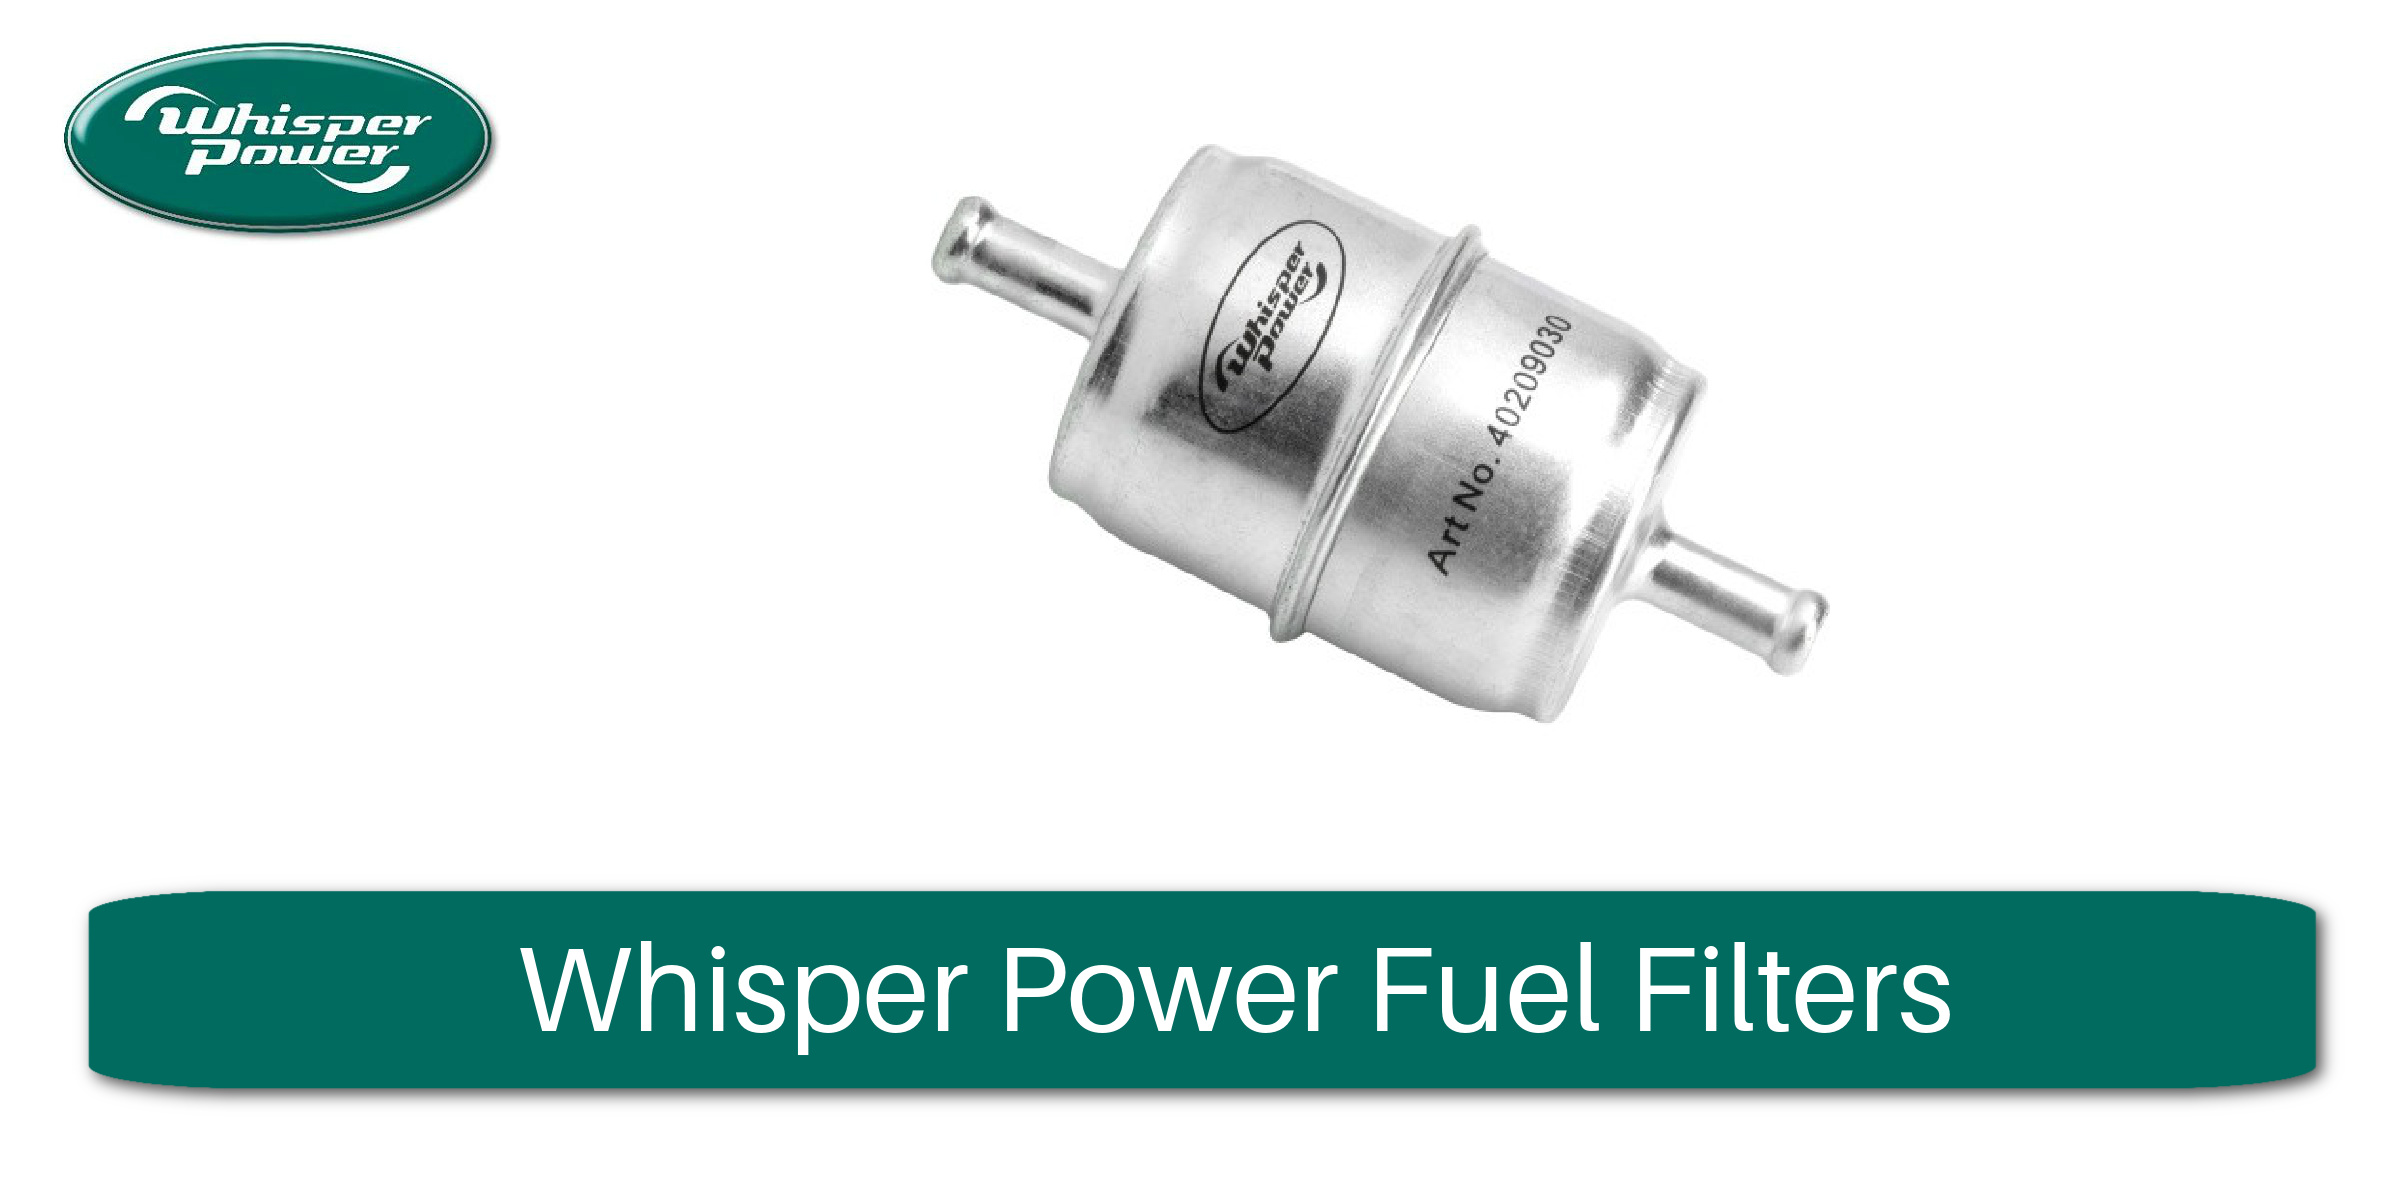 Whisper Power Fuel Filters